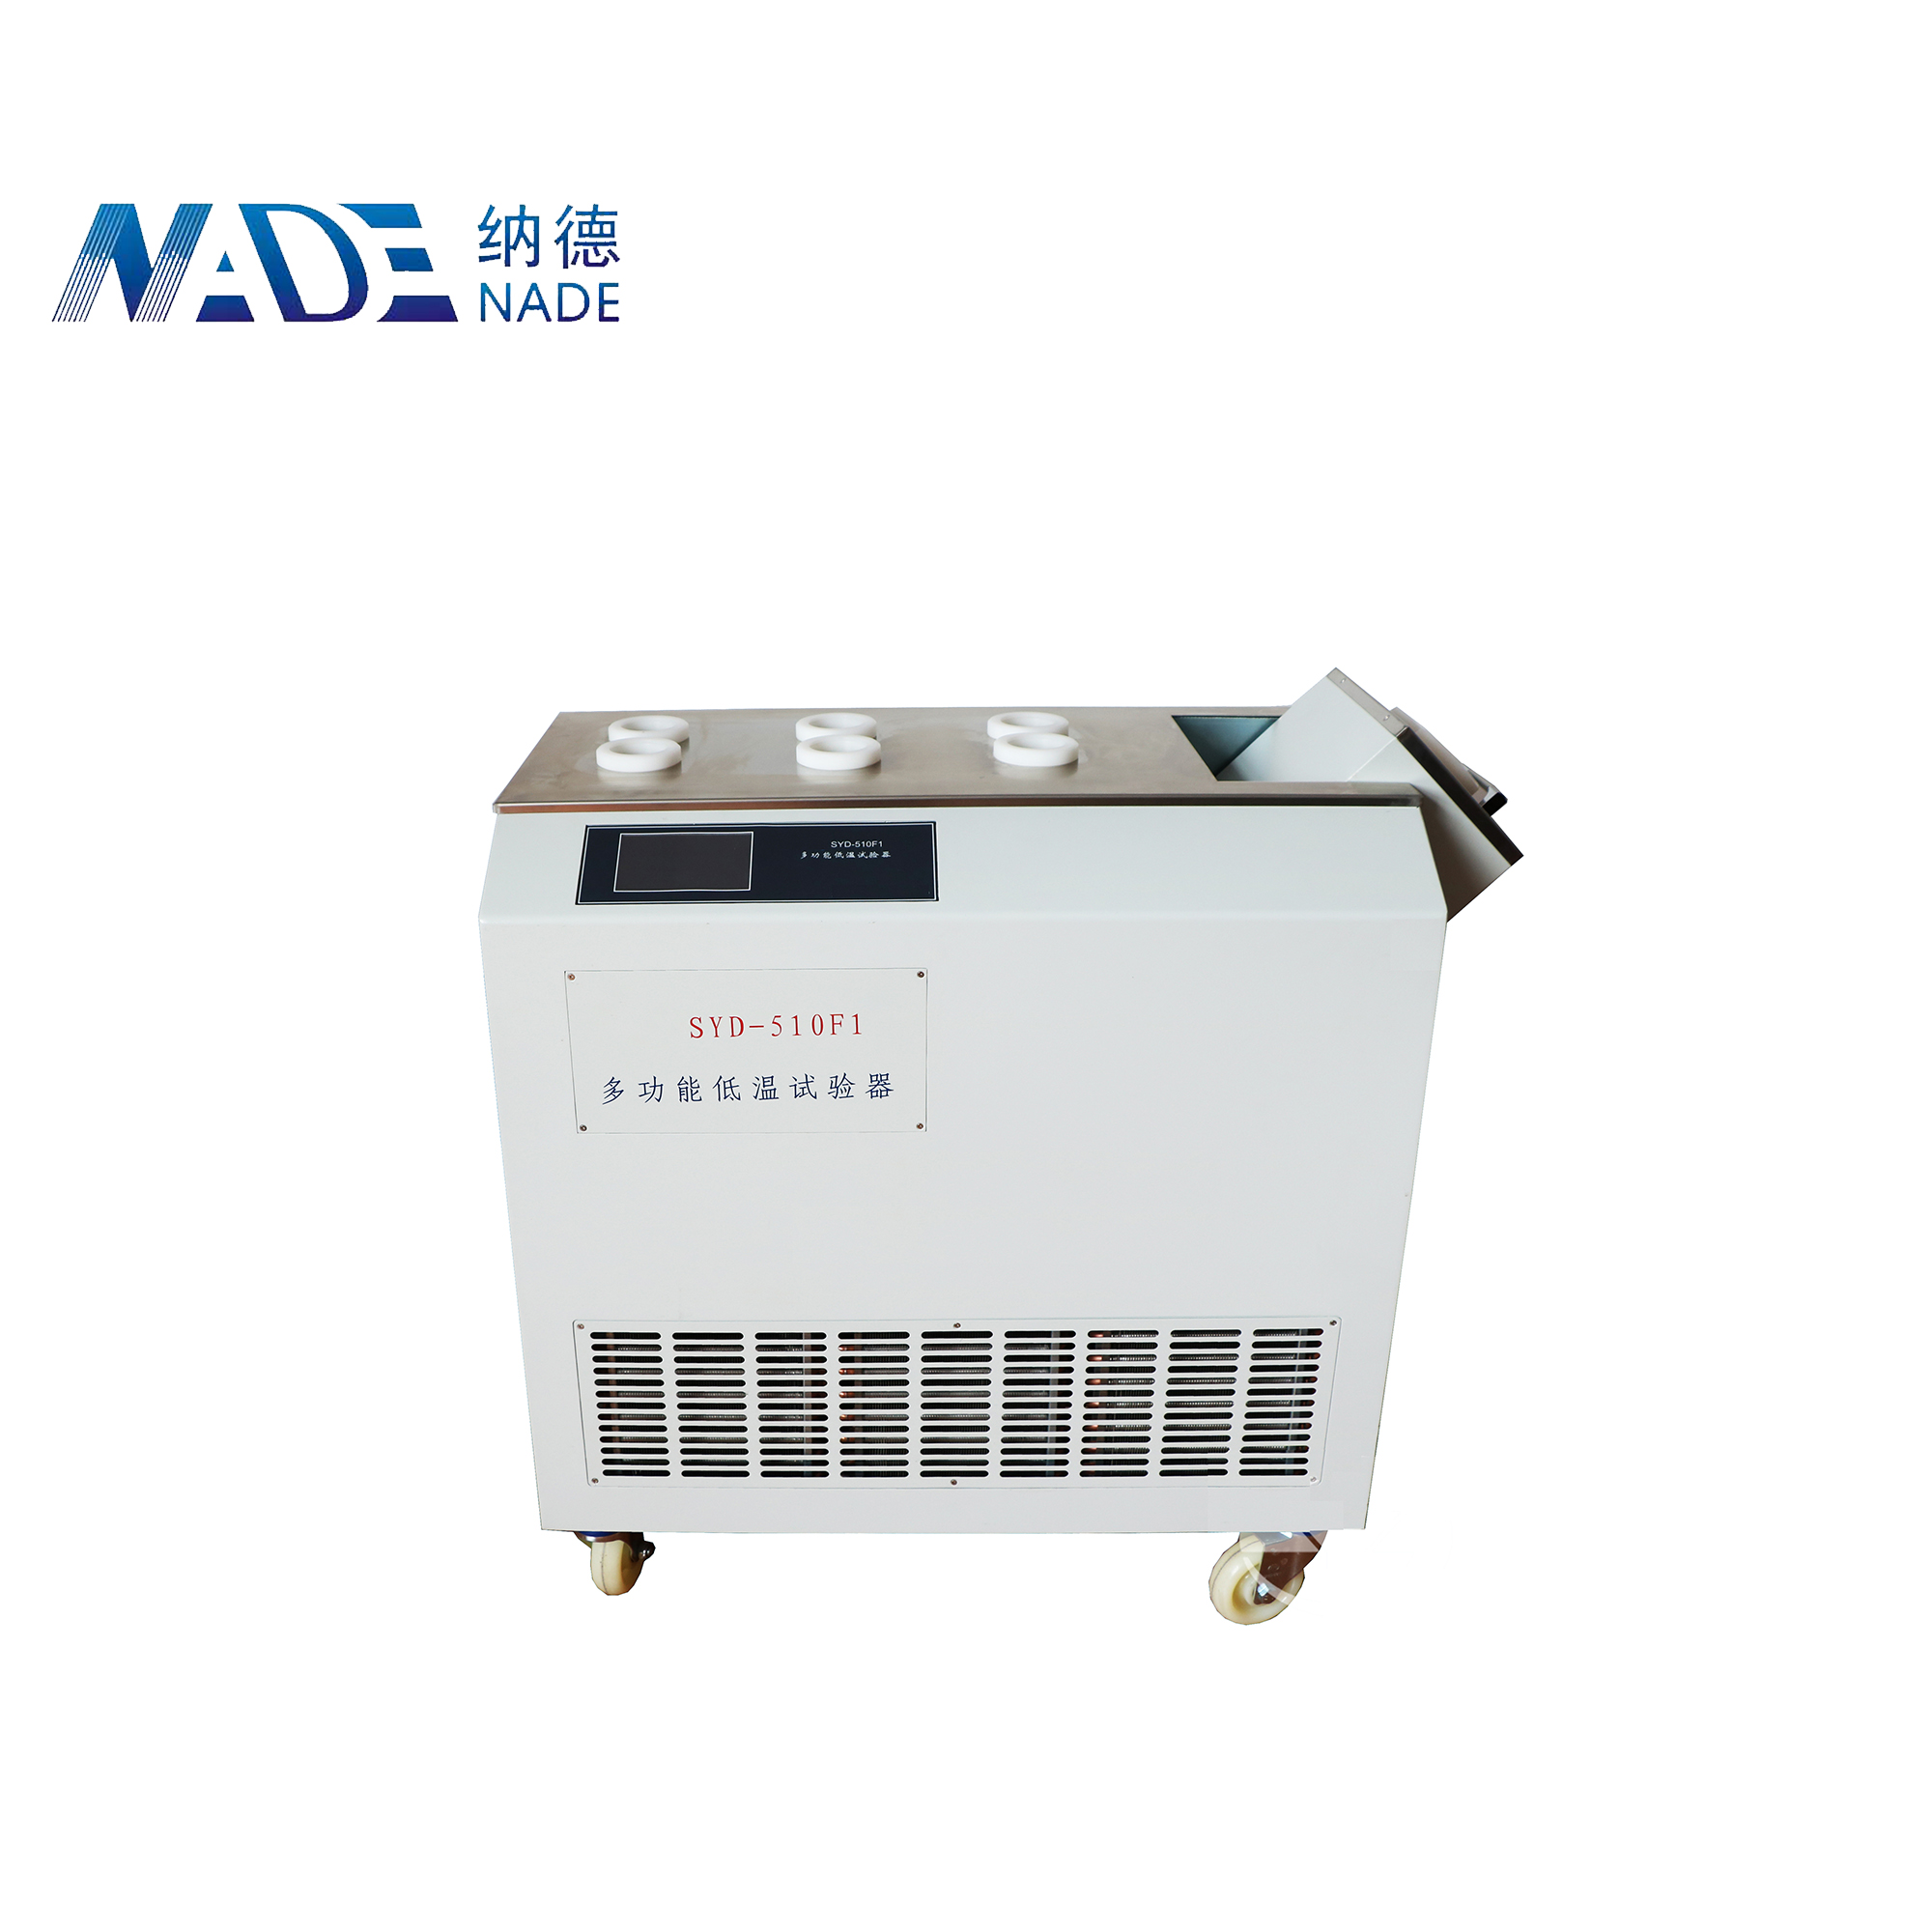 NADE SYD-510F1 Laboratory Multifunctional Low-temperature Tester(Touch screen)/Solidifying Point Tester of petroleum products